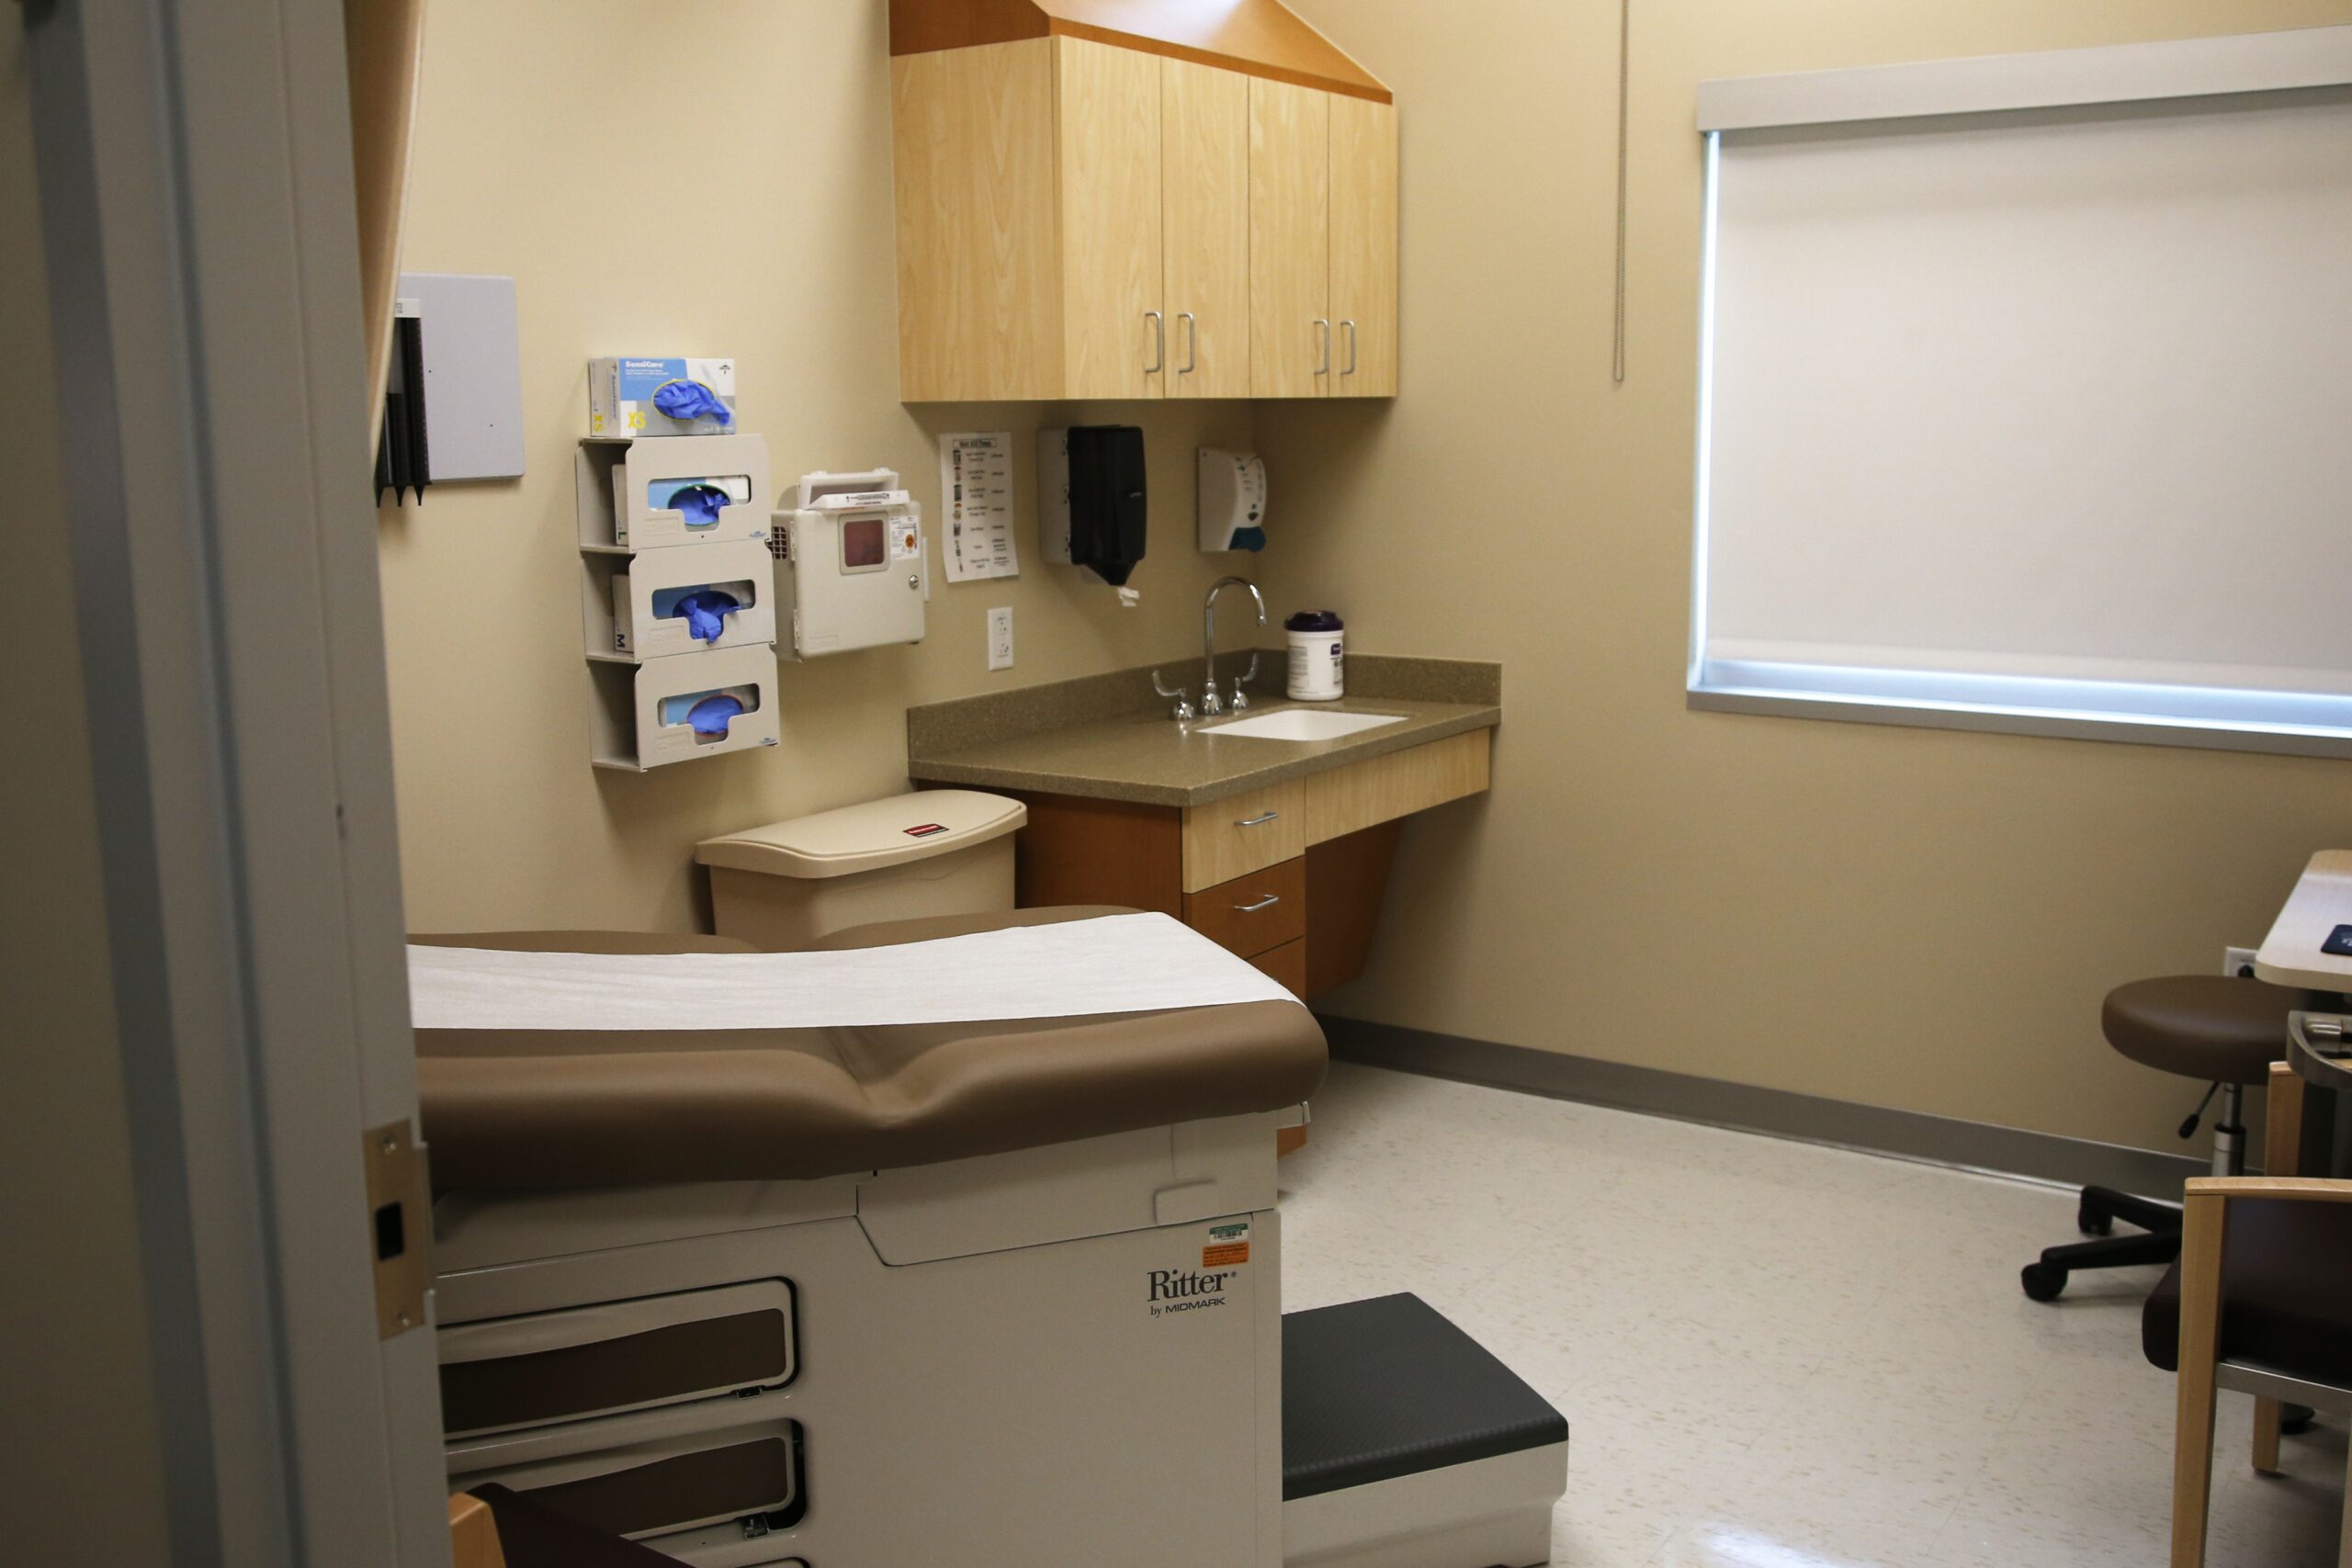 Renewed Proposal Would Require Consent For Pelvic Exams On Unconscious Patients In Wisconsin